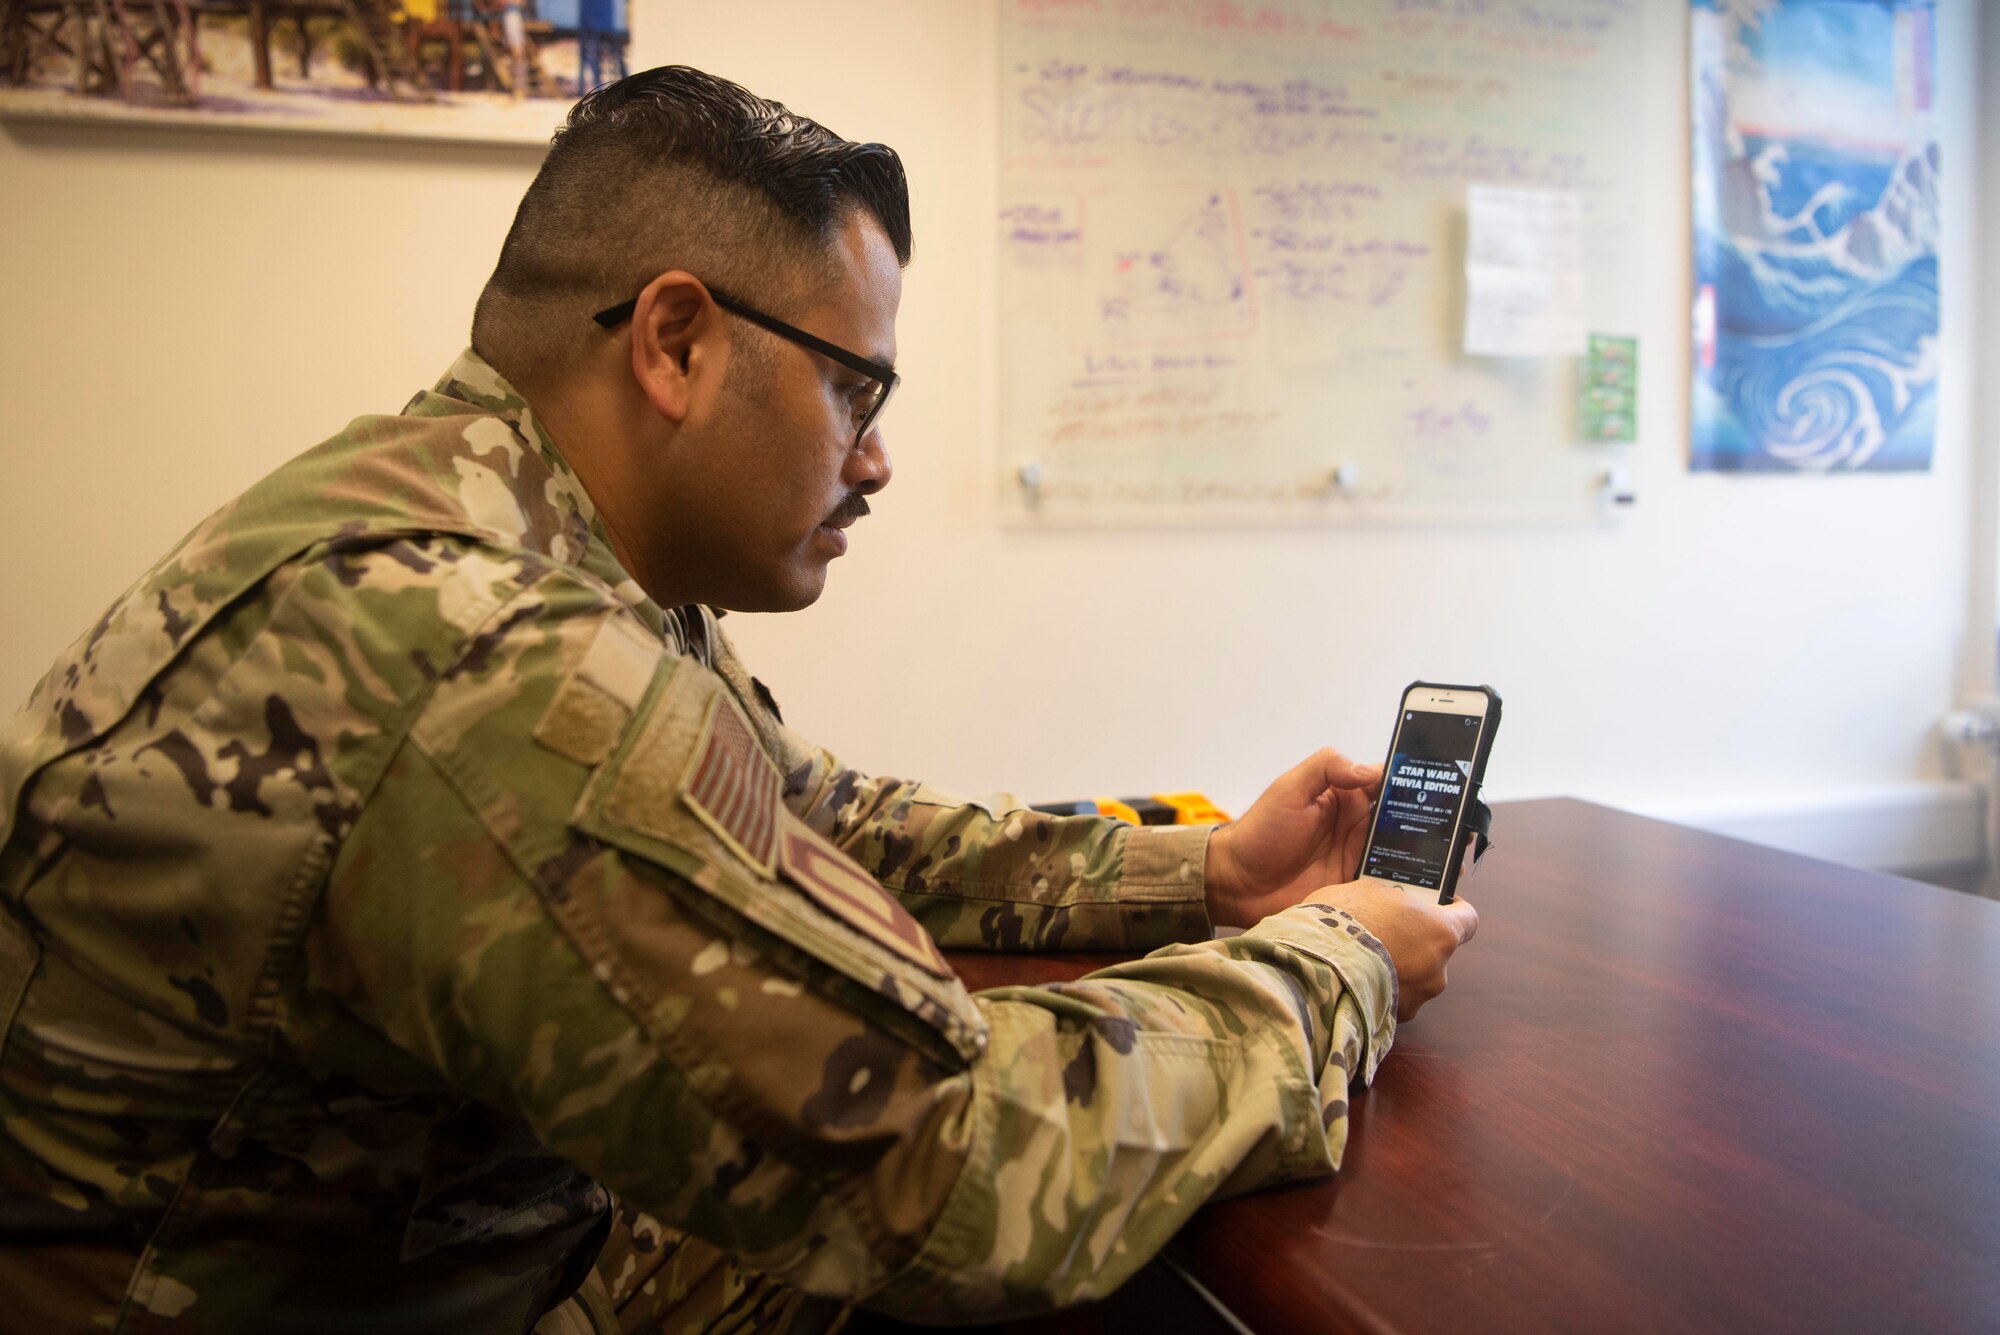 Master Sgt. Carlos Castro, 100th Force Support Squadron Airman and Family Readiness Center readiness noncommissioned officer, monitors the helping agency’s social media page at RAF Mildenhall, England, May 4, 2020. The AFRC has utilized social media to promote services and opportunities to the base community during the COVID-19 lockdown. (U.S. Air Force photo by Airman 1st Class Joseph Barron)